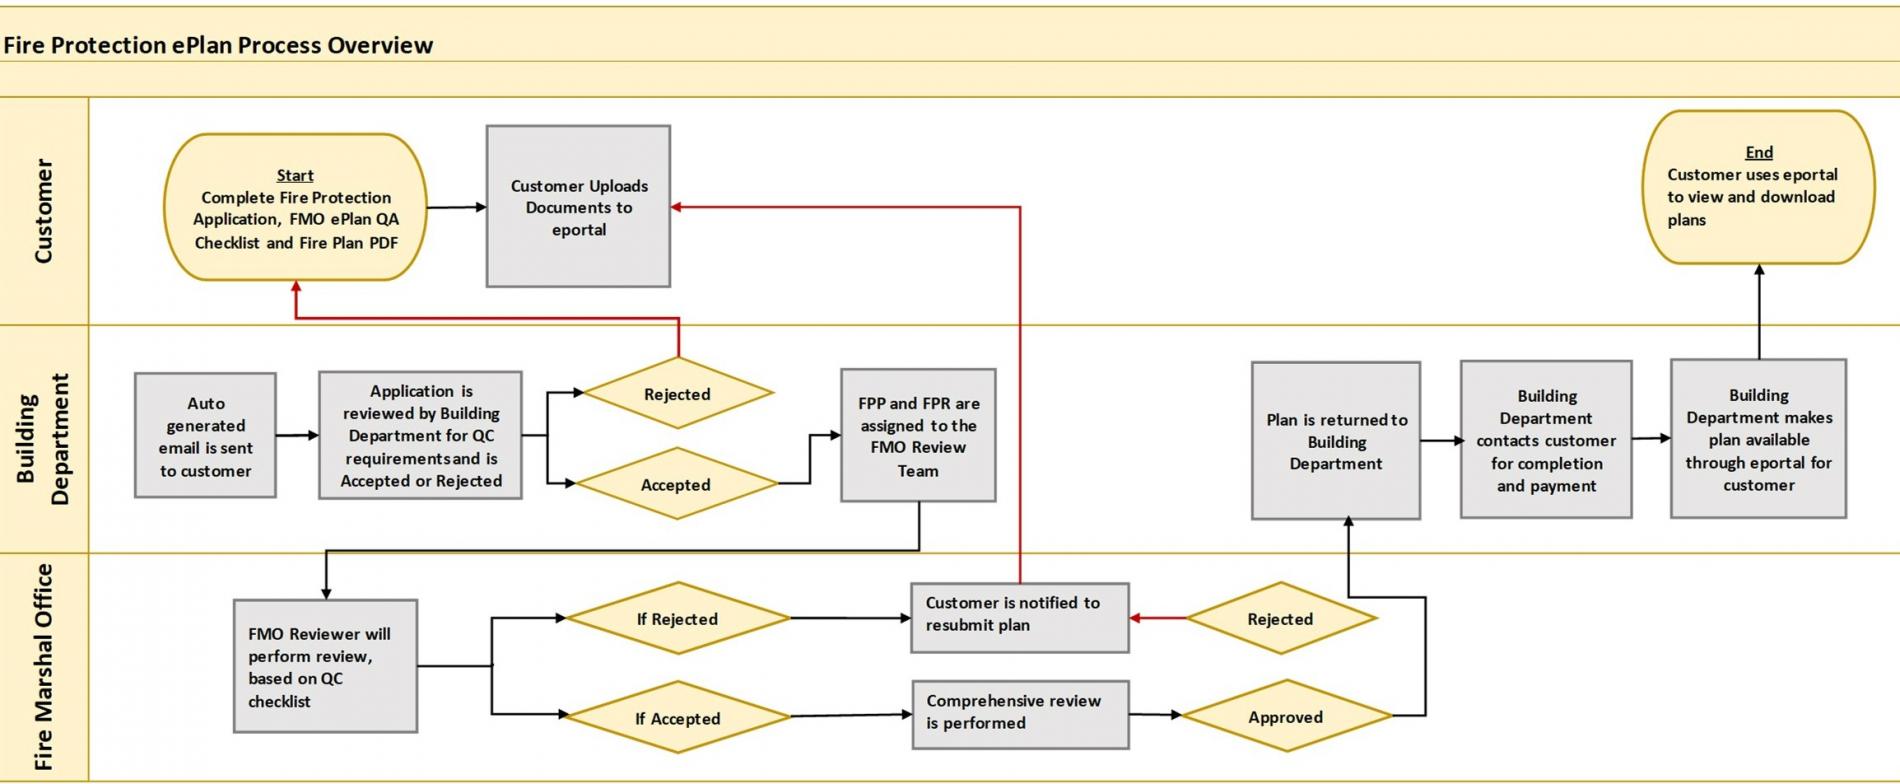 Flowchart - Fire Protection ePlan Process Overview